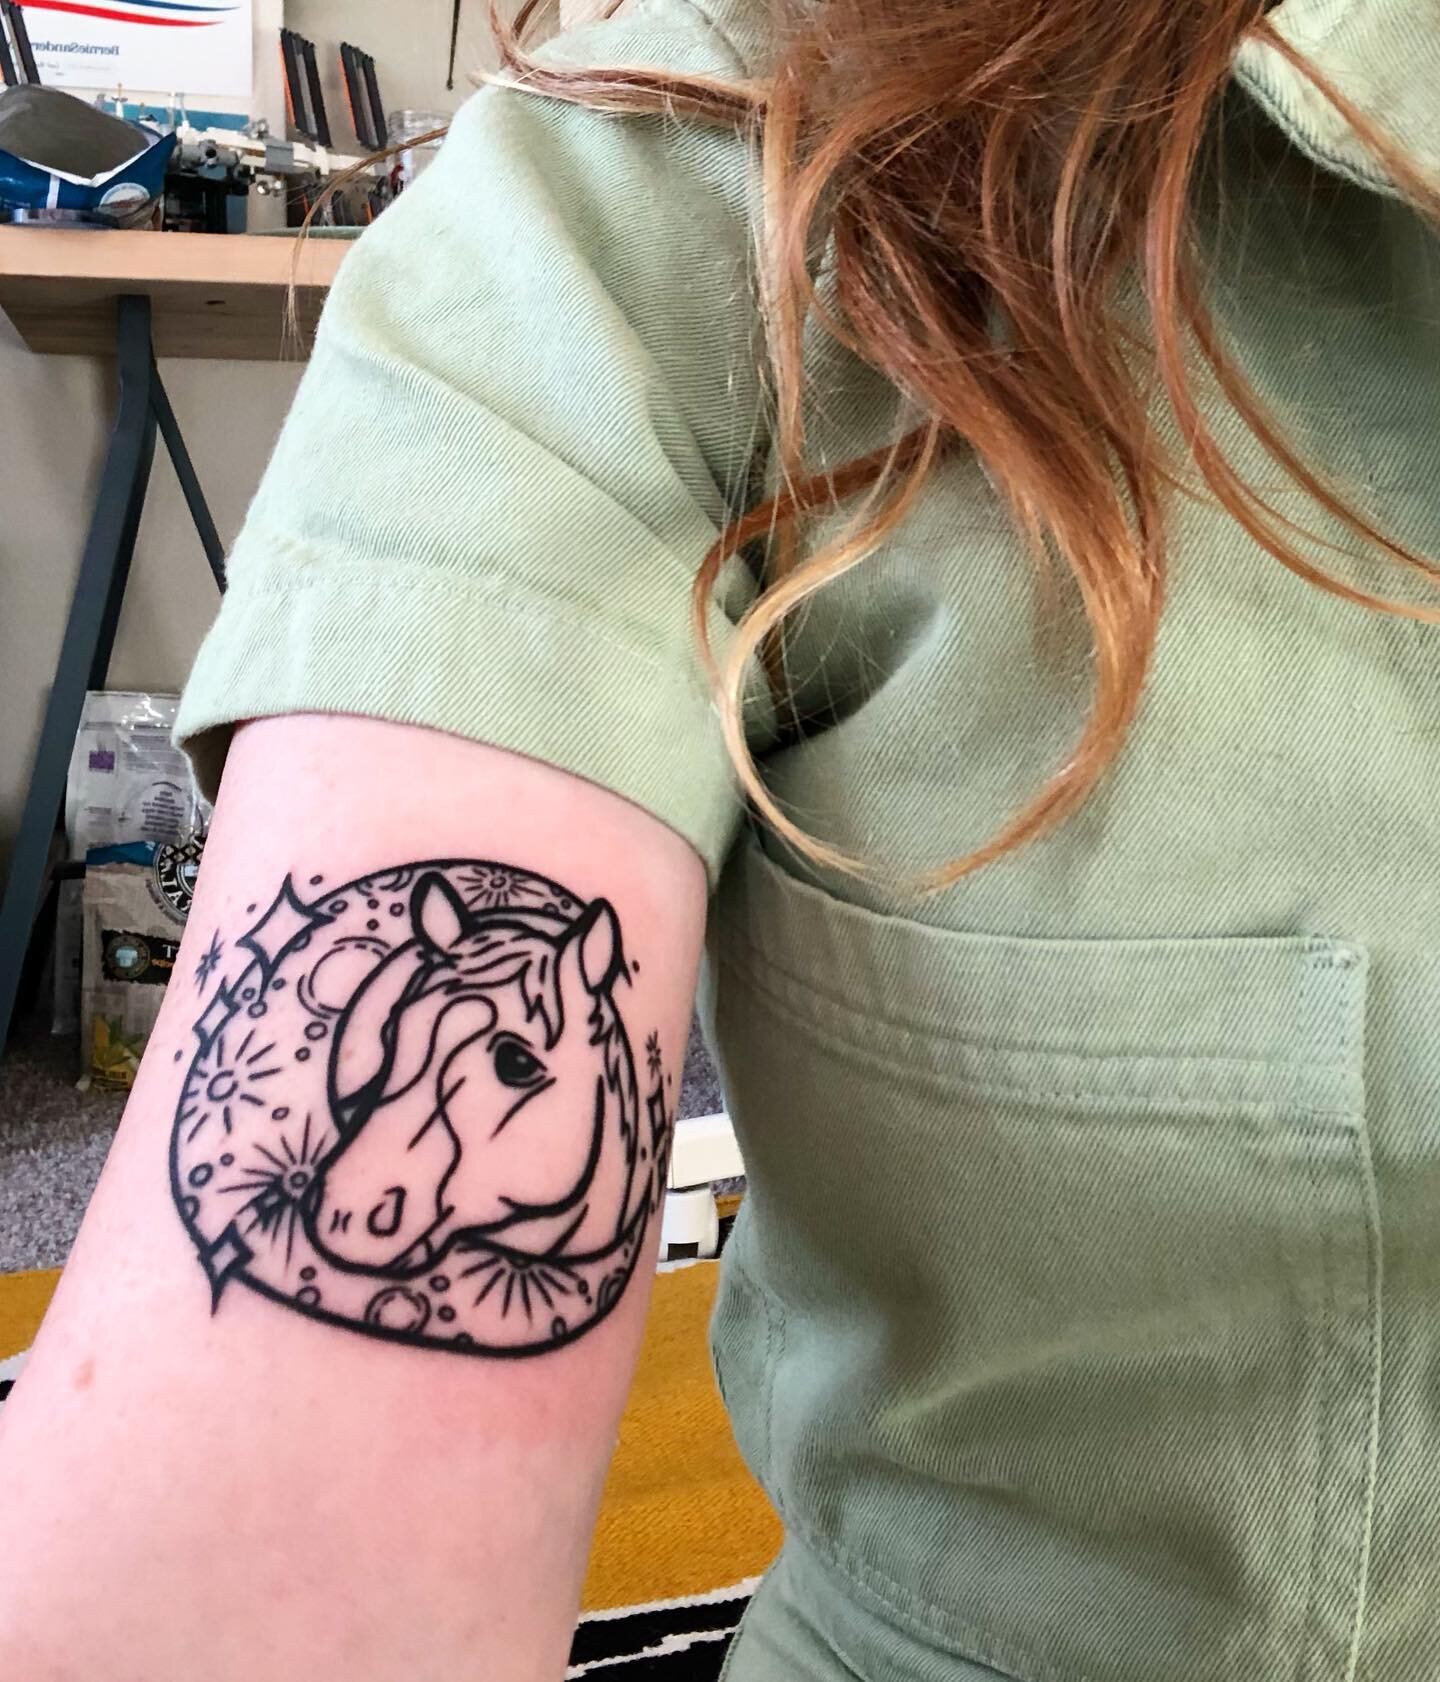 Surprise!! New tat featuring my best friend since age 7. I only get to see Mason every once in a while because we live on opposite coasts but now I have him with me all the time. #horsegirl #4ever